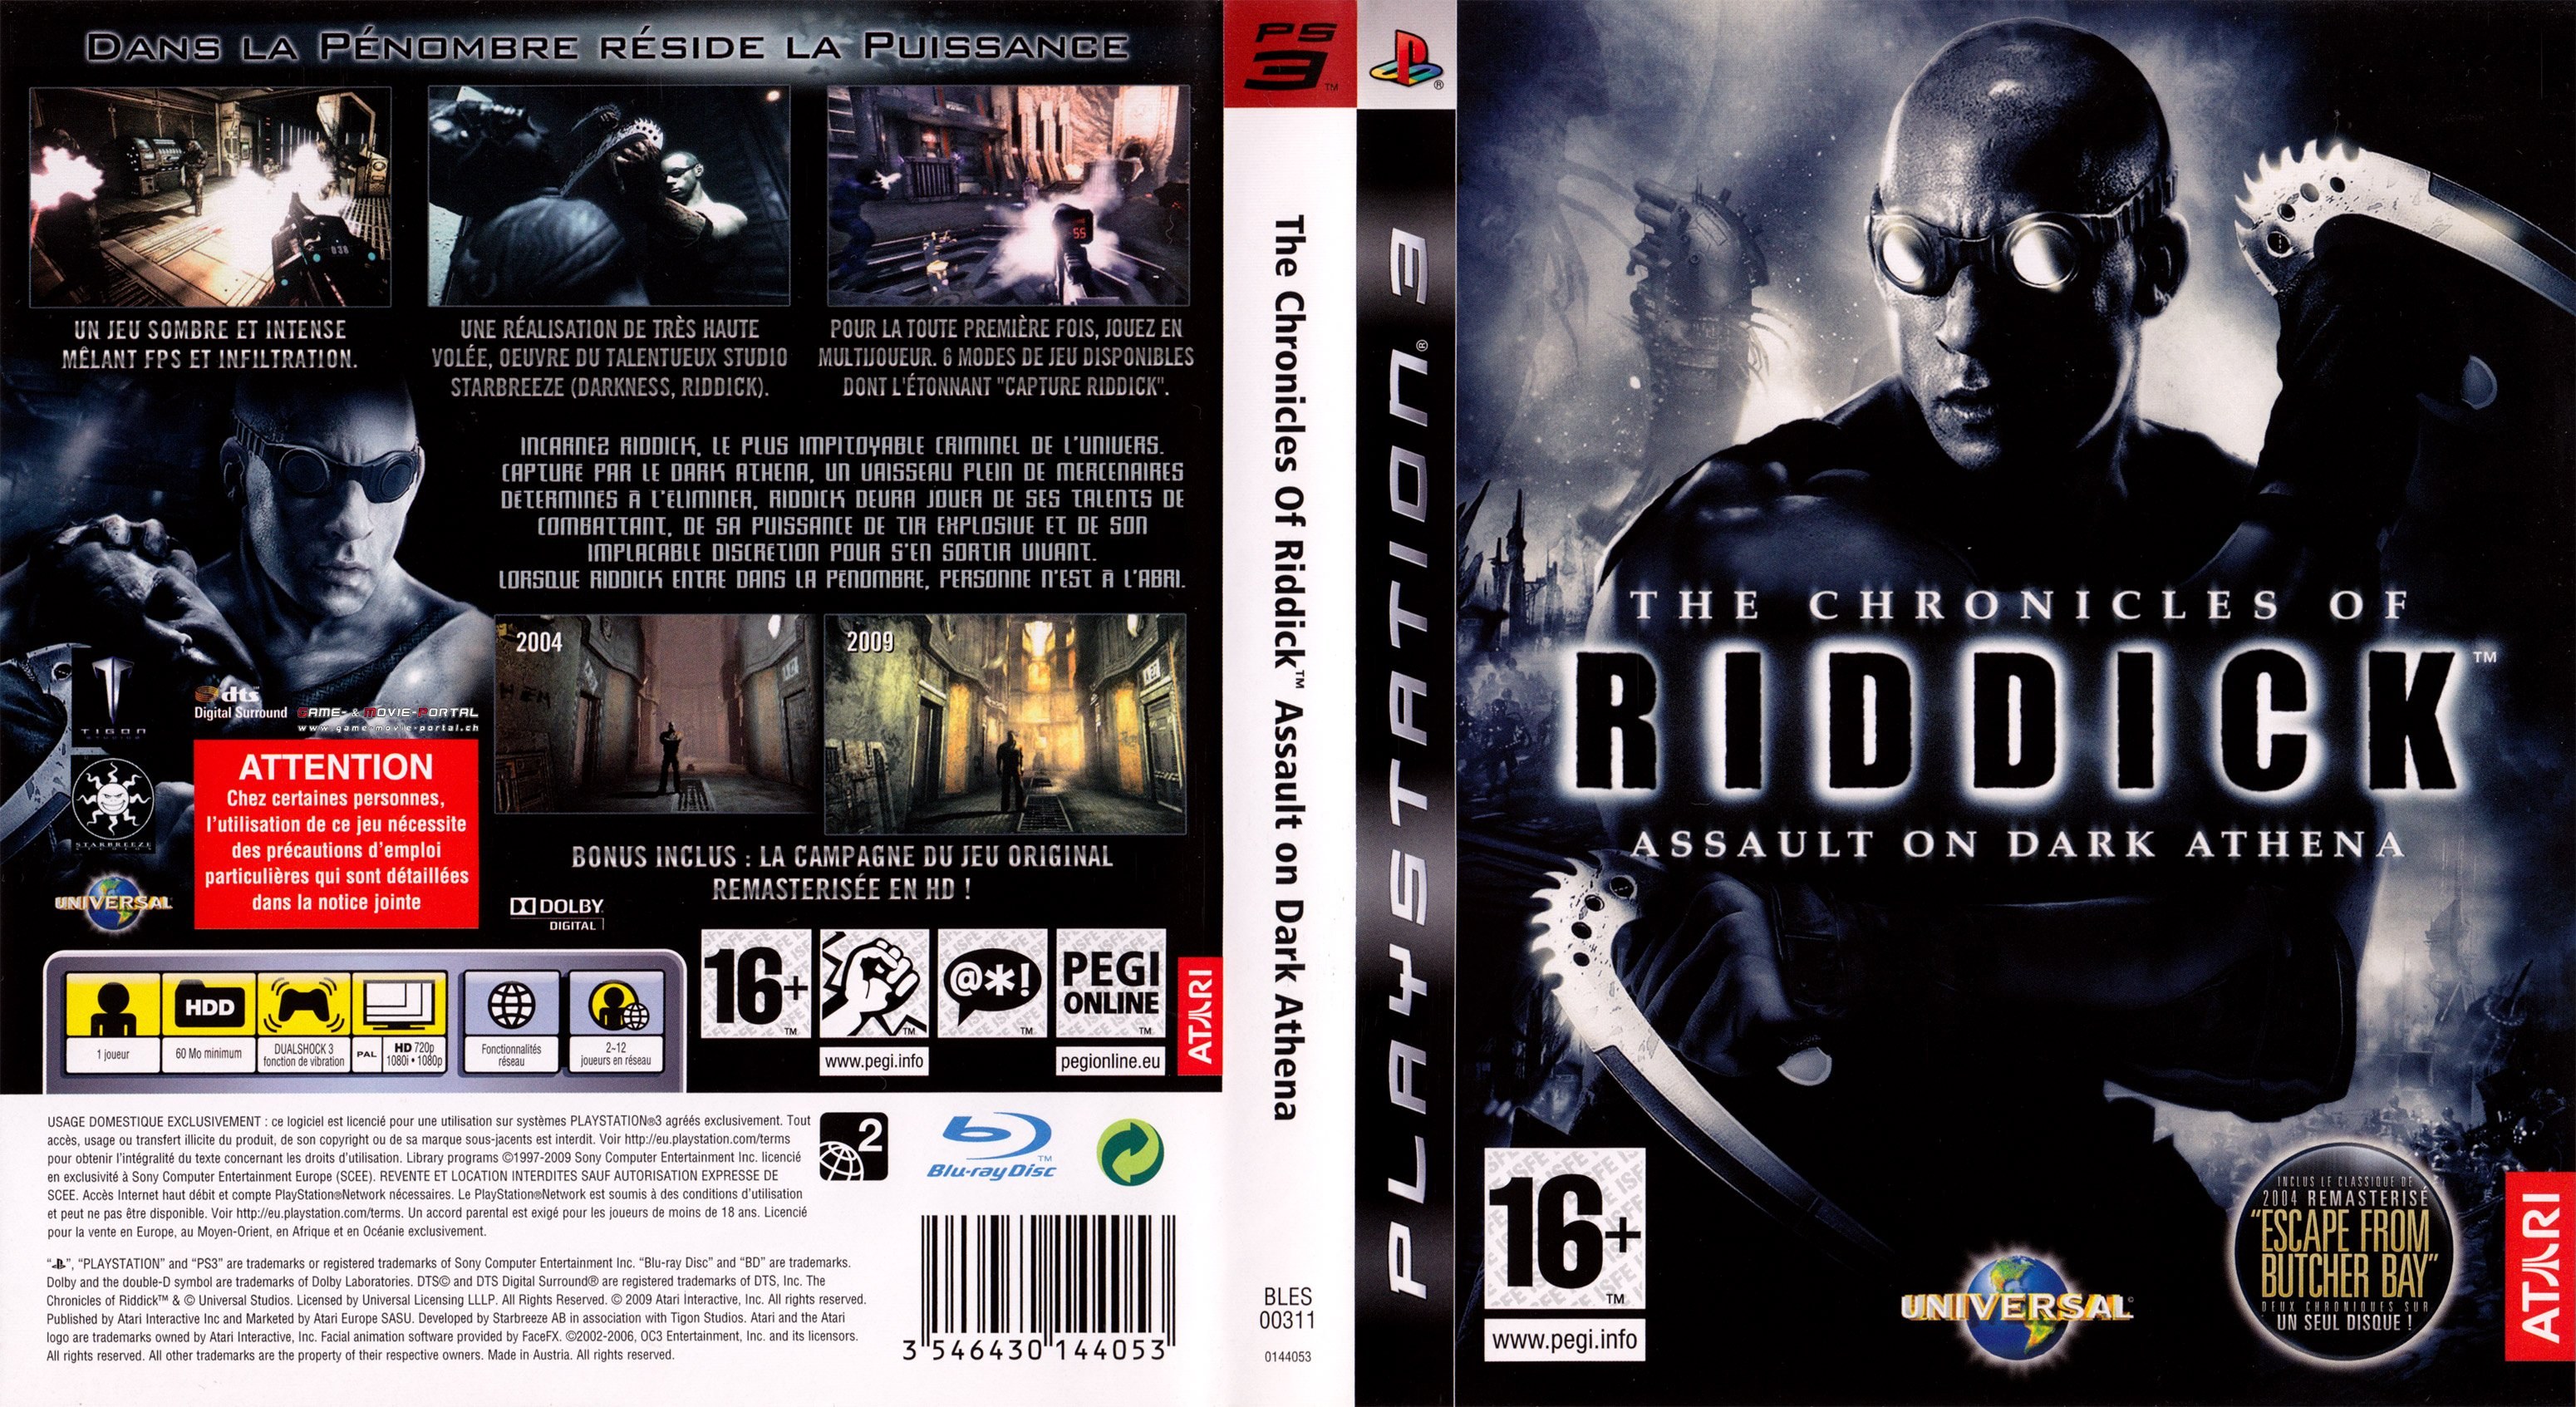 The Chronicles of Riddick ps3. Riddick Xbox 360 обложка. Ps3 the Chronicles of Riddick: Assault. The Chronicles of Riddick 3 пс3. Bles ps3